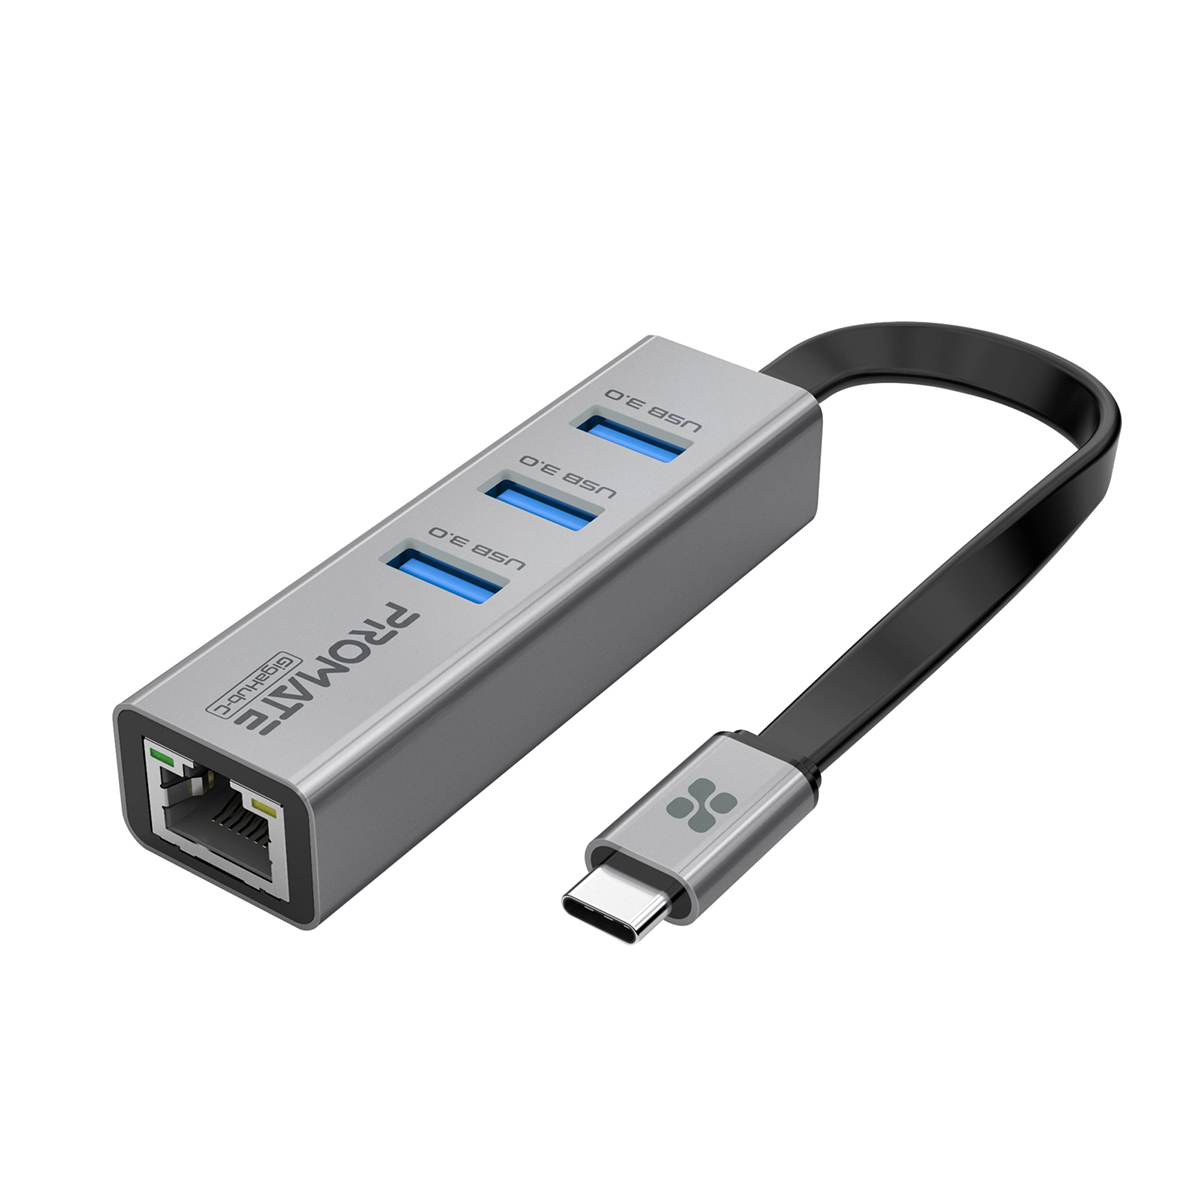 Promate USB-C Hub with Ethernet Adapter, Multiport USB-C to 1000Mbps RJ45 Network Adapter with Ultra-Fast 3 USB Ports, 5 Gbps Data Transfer Speed for MacBook Pro/Air, iMac, iPad Pro, Surface, XPS, GigaHub-C